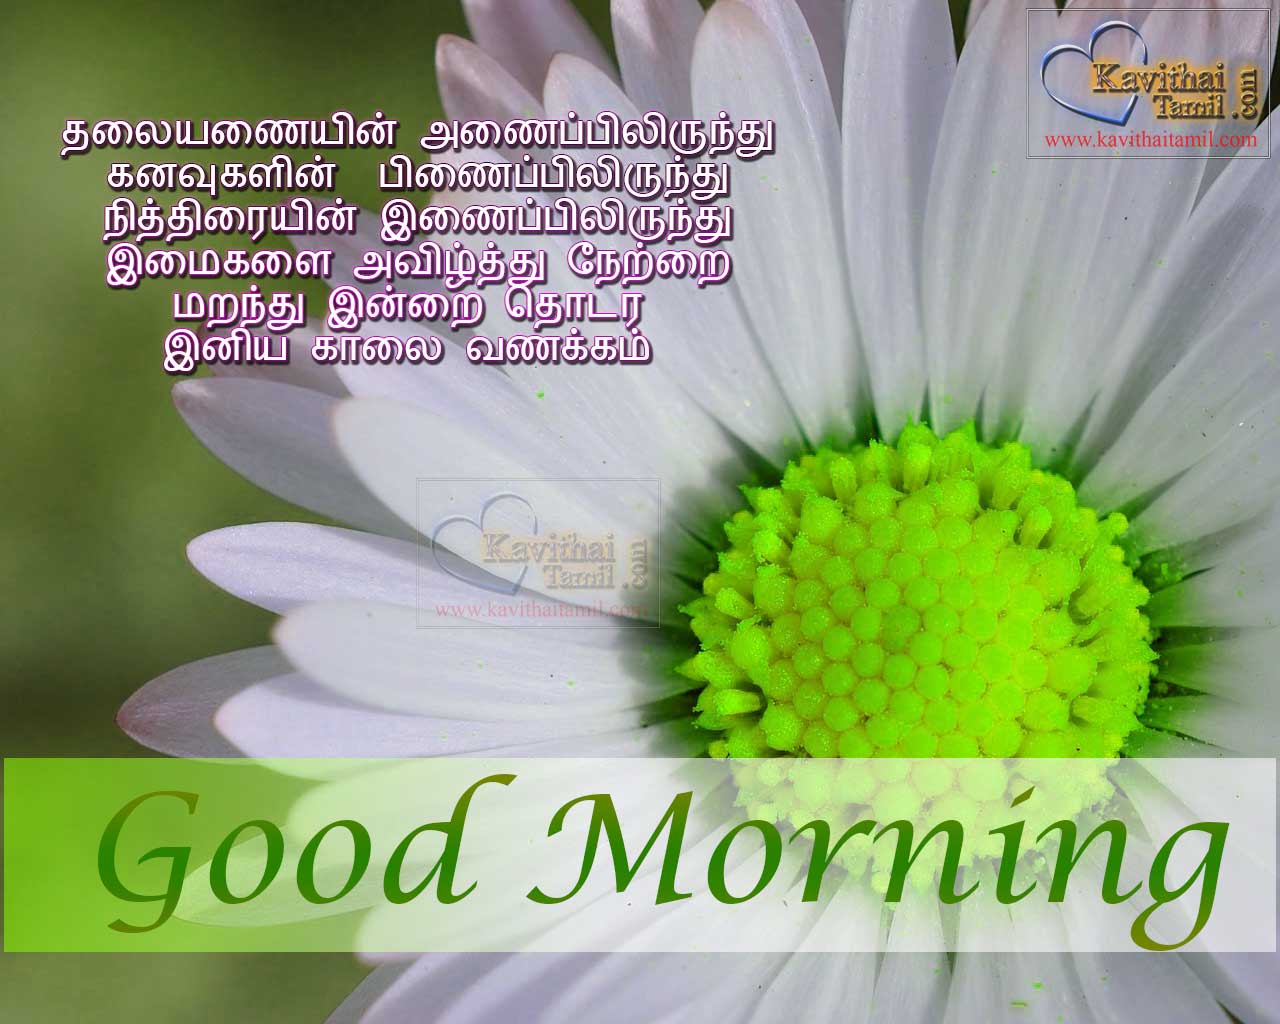 Super Good Morning Wishing Greetings In Tamil Language With Super Tamil kavithai Varigal lines For Wishing Facebook And Whatsapp Friend